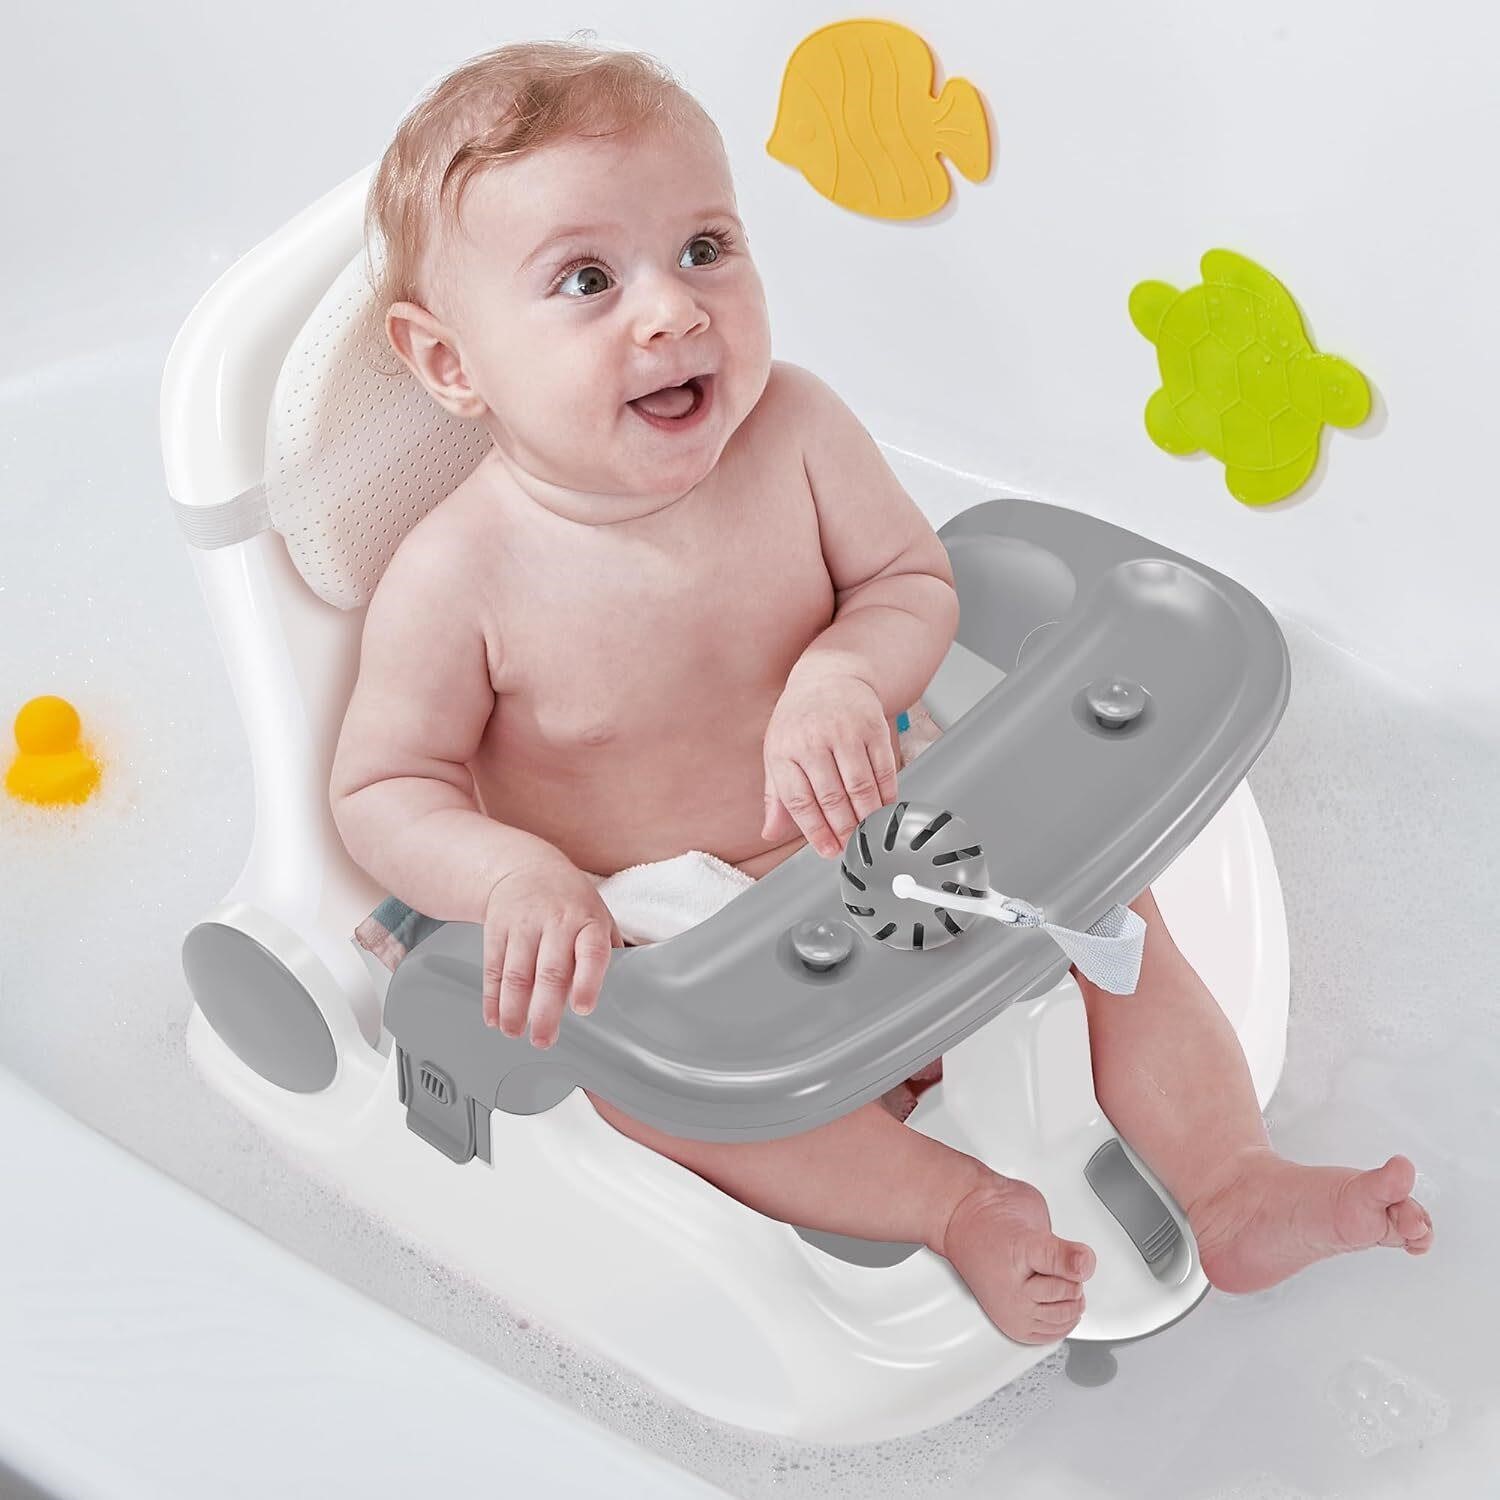 Obee Odee Baby Bath Seat  2 Modes  Light Grey